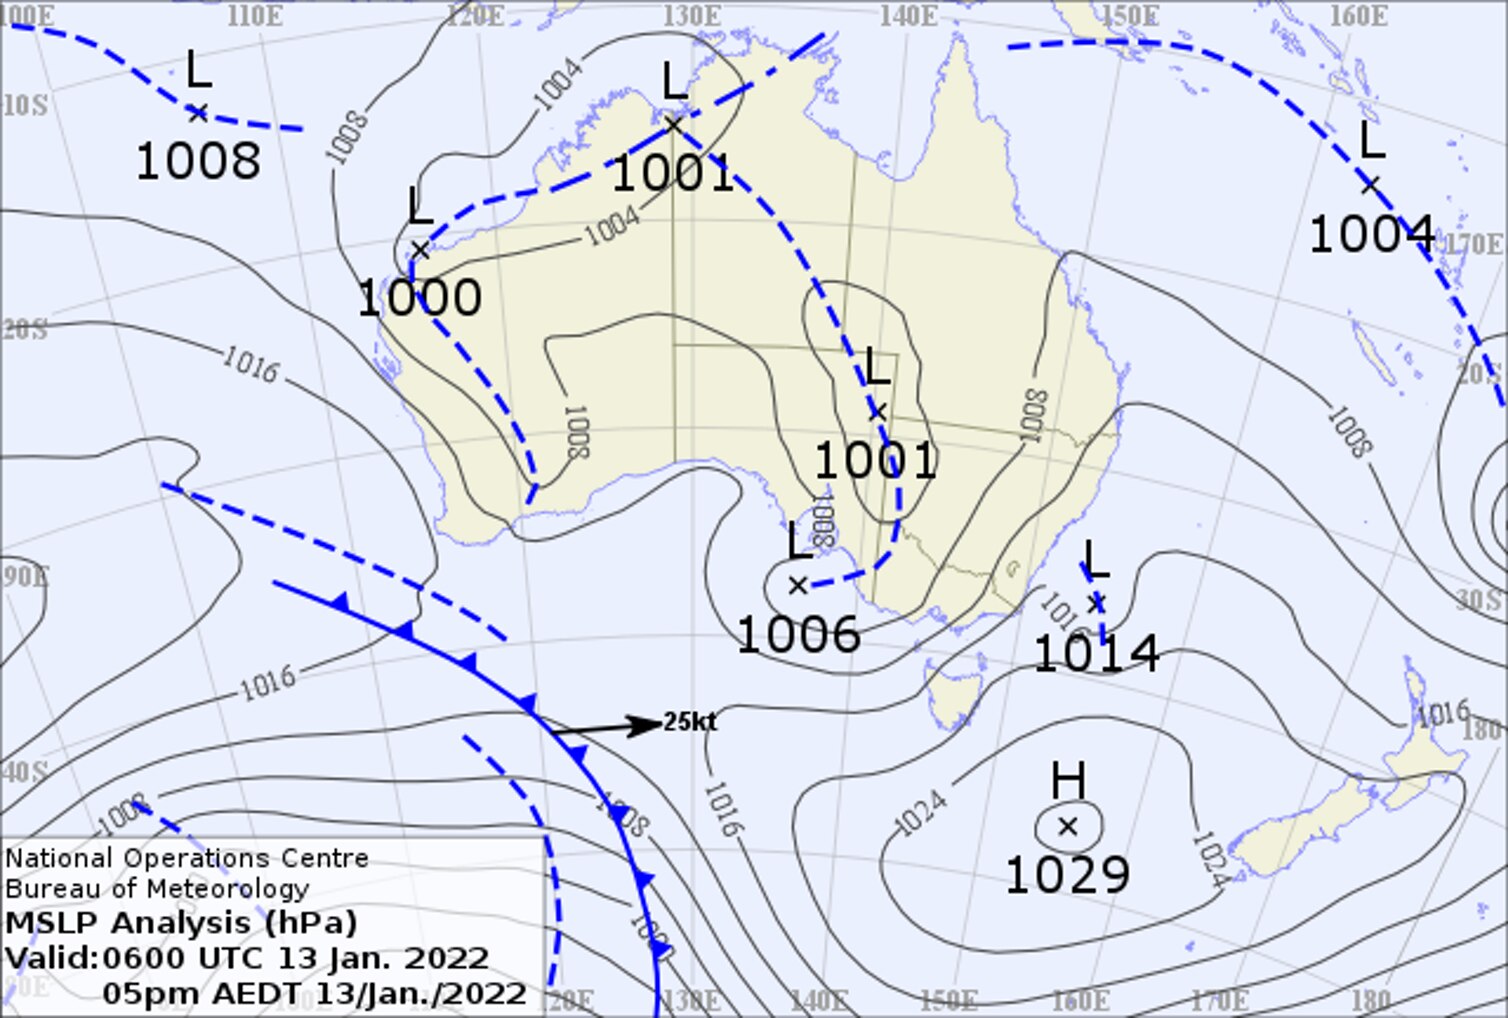 A weather chart showing systems and fronts over a map of Australia